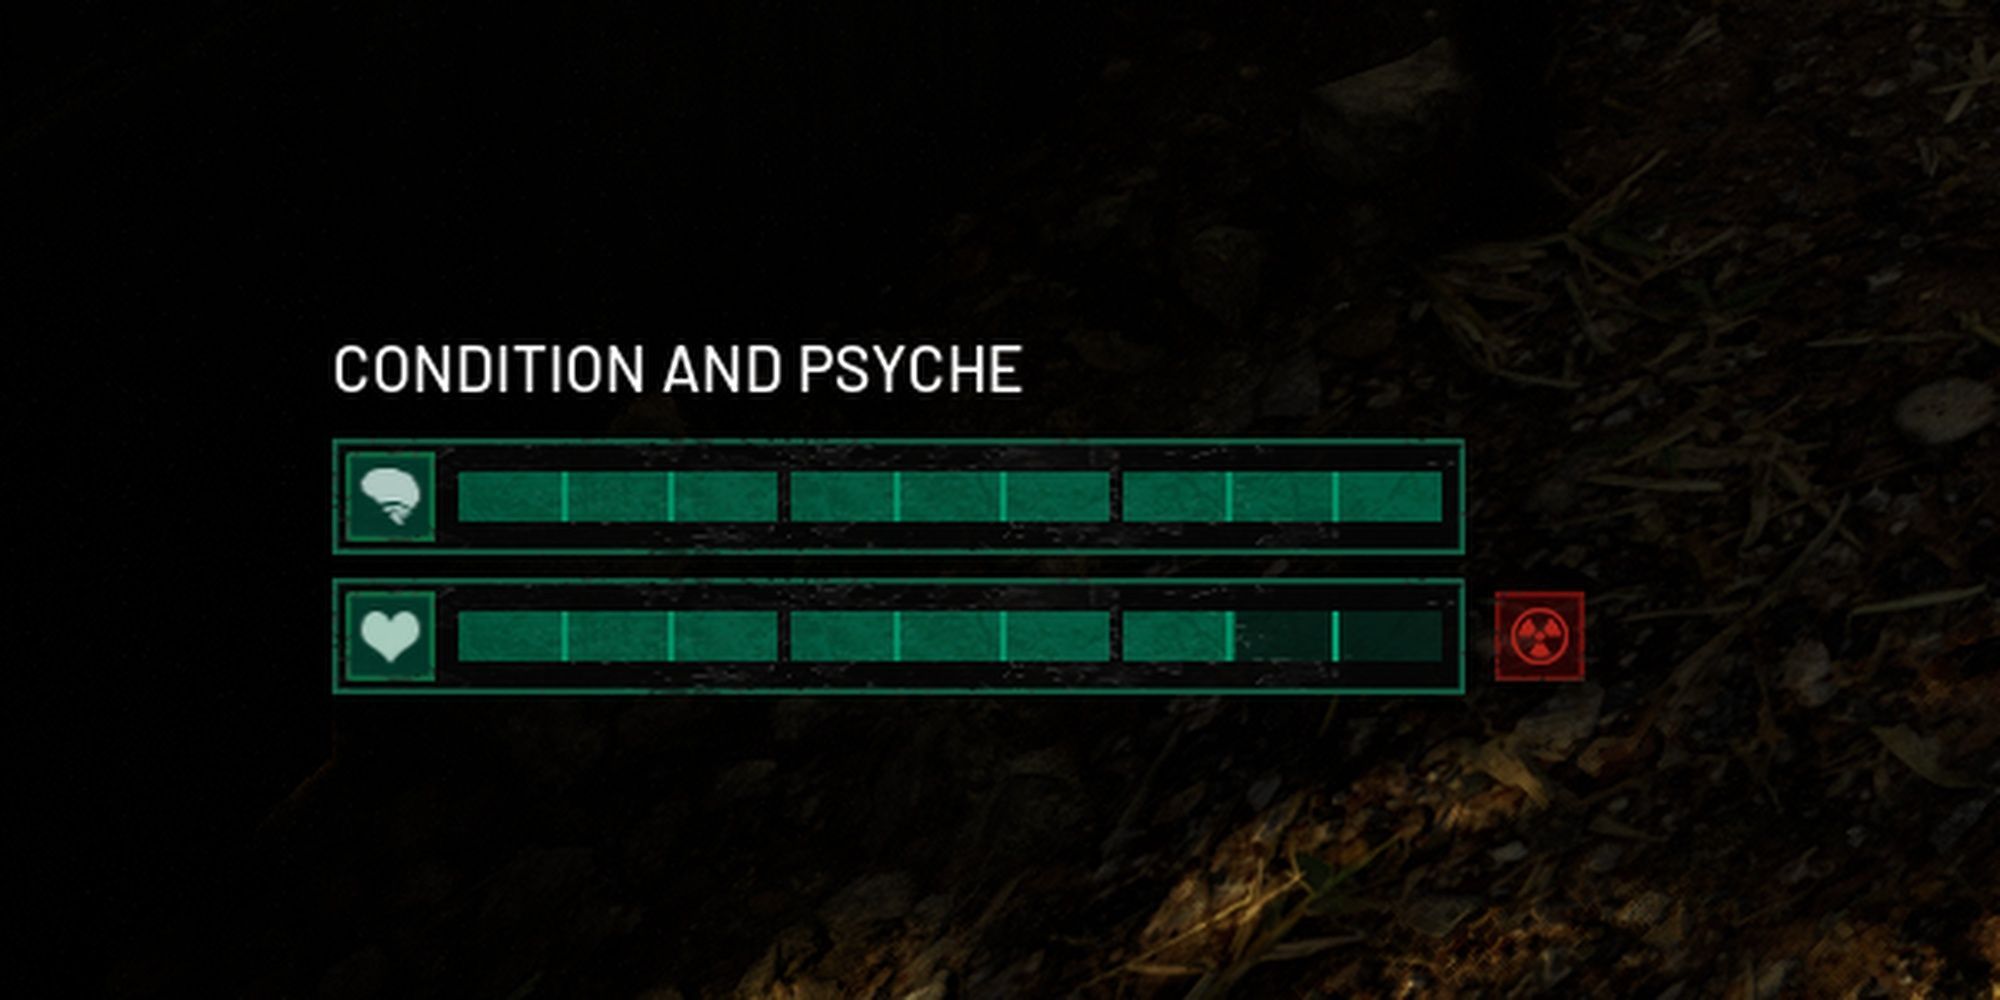 chernobylite condition bars showing health and psyche